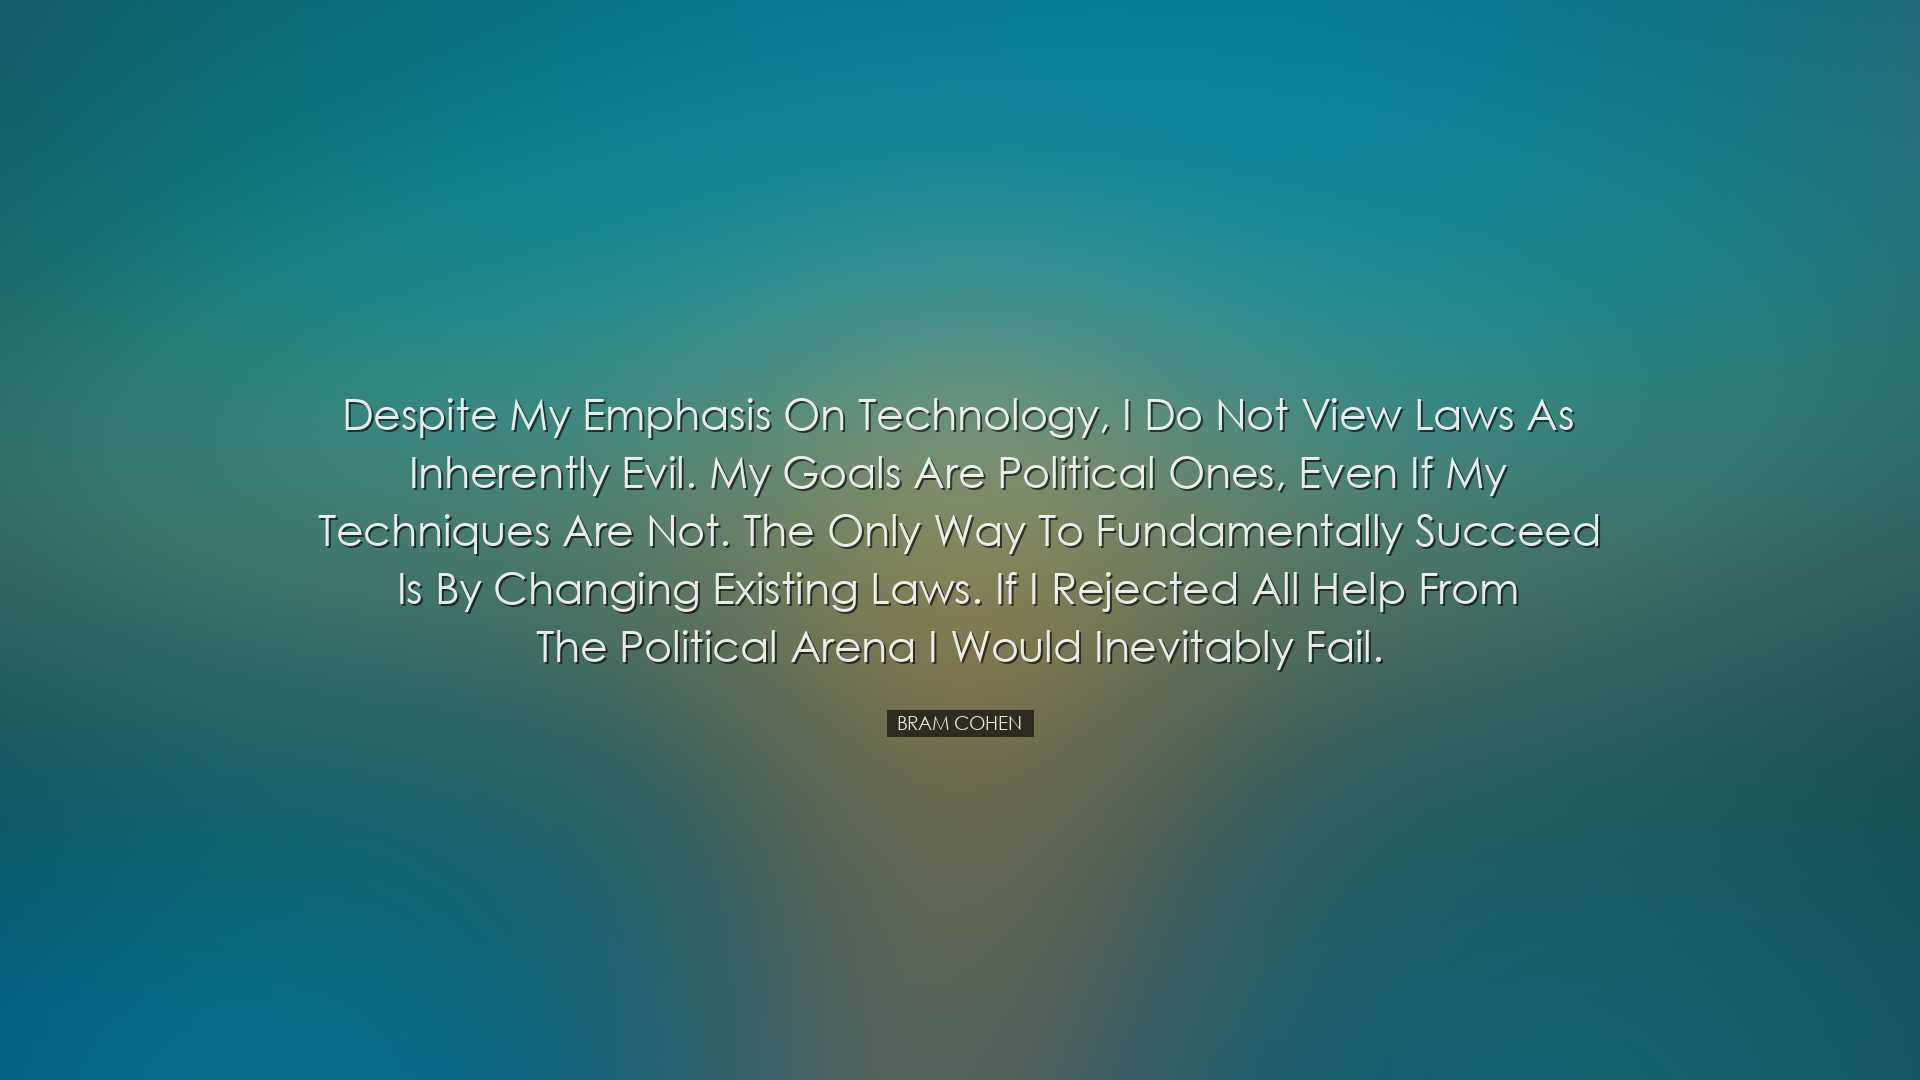 Despite my emphasis on technology, I do not view laws as inherentl